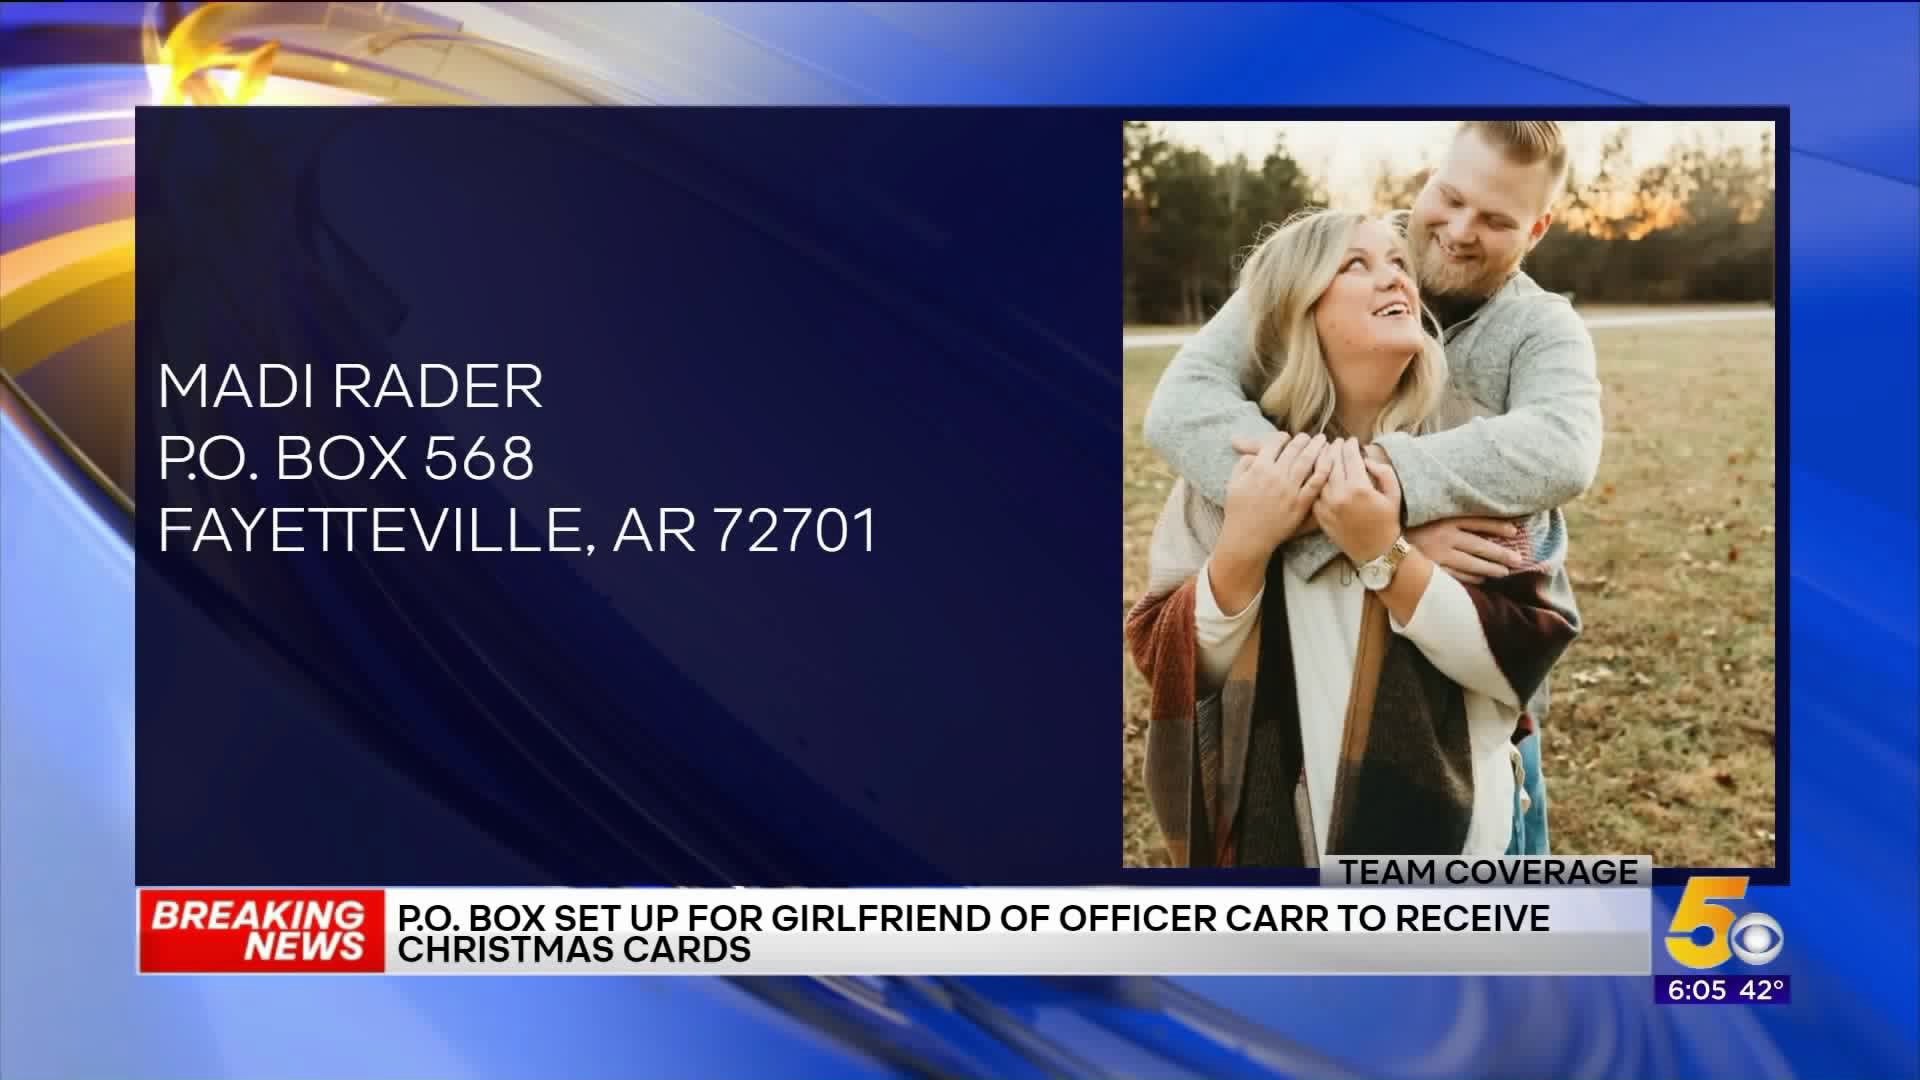 P.O. Box Set Up For Girlfriend Of Slain Fayetteville Officer To Receive Christmas Cards